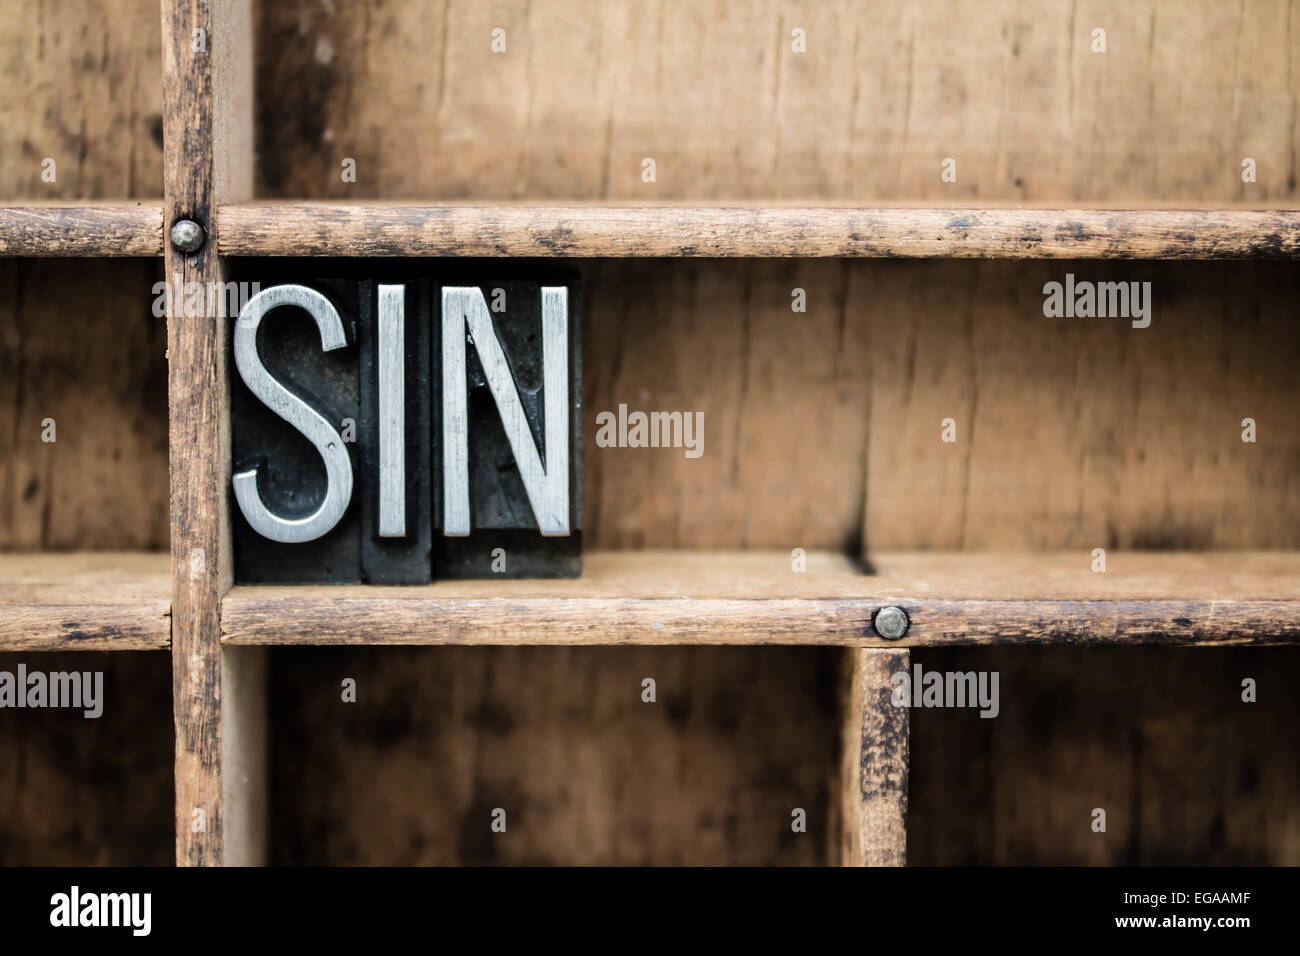 The word 'SIN' written in vintage metal letterpress type in a wooden drawer with dividers. Stock Photo